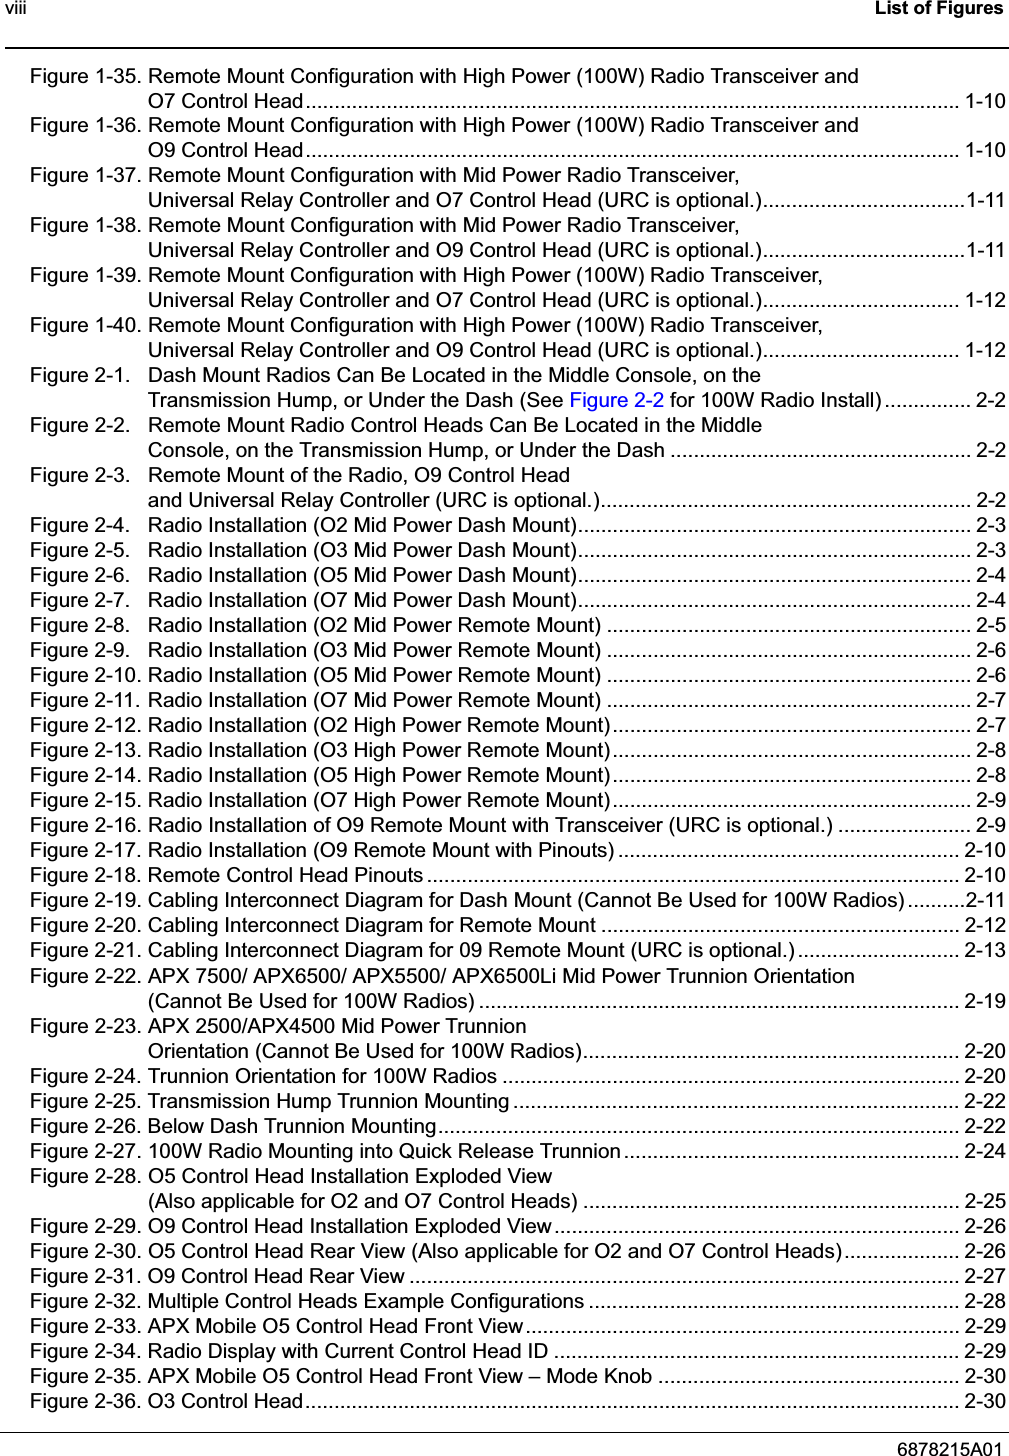 viii List of Figures6878215A01Figure 1-35. Remote Mount Configuration with High Power (100W) Radio Transceiver and O7 Control Head.................................................................................................................1-10Figure 1-36. Remote Mount Configuration with High Power (100W) Radio Transceiver and O9 Control Head.................................................................................................................1-10Figure 1-37. Remote Mount Configuration with Mid Power Radio Transceiver, Universal Relay Controller and O7 Control Head (URC is optional.)...................................1-11Figure 1-38. Remote Mount Configuration with Mid Power Radio Transceiver, Universal Relay Controller and O9 Control Head (URC is optional.)...................................1-11Figure 1-39. Remote Mount Configuration with High Power (100W) Radio Transceiver,Universal Relay Controller and O7 Control Head (URC is optional.).................................. 1-12Figure 1-40. Remote Mount Configuration with High Power (100W) Radio Transceiver,Universal Relay Controller and O9 Control Head (URC is optional.).................................. 1-12Figure 2-1. Dash Mount Radios Can Be Located in the Middle Console, on theTransmission Hump, or Under the Dash (See Figure 2-2 for 100W Radio Install) ............... 2-2Figure 2-2. Remote Mount Radio Control Heads Can Be Located in the MiddleConsole, on the Transmission Hump, or Under the Dash .................................................... 2-2Figure 2-3. Remote Mount of the Radio, O9 Control Headand Universal Relay Controller (URC is optional.)................................................................ 2-2Figure 2-4. Radio Installation (O2 Mid Power Dash Mount).................................................................... 2-3Figure 2-5. Radio Installation (O3 Mid Power Dash Mount).................................................................... 2-3Figure 2-6. Radio Installation (O5 Mid Power Dash Mount).................................................................... 2-4Figure 2-7. Radio Installation (O7 Mid Power Dash Mount).................................................................... 2-4Figure 2-8. Radio Installation (O2 Mid Power Remote Mount) ............................................................... 2-5Figure 2-9. Radio Installation (O3 Mid Power Remote Mount) ............................................................... 2-6Figure 2-10. Radio Installation (O5 Mid Power Remote Mount) ............................................................... 2-6Figure 2-11. Radio Installation (O7 Mid Power Remote Mount) ............................................................... 2-7Figure 2-12. Radio Installation (O2 High Power Remote Mount).............................................................. 2-7Figure 2-13. Radio Installation (O3 High Power Remote Mount).............................................................. 2-8Figure 2-14. Radio Installation (O5 High Power Remote Mount).............................................................. 2-8Figure 2-15. Radio Installation (O7 High Power Remote Mount).............................................................. 2-9Figure 2-16. Radio Installation of O9 Remote Mount with Transceiver (URC is optional.) ....................... 2-9Figure 2-17. Radio Installation (O9 Remote Mount with Pinouts) ........................................................... 2-10Figure 2-18. Remote Control Head Pinouts ............................................................................................ 2-10Figure 2-19. Cabling Interconnect Diagram for Dash Mount (Cannot Be Used for 100W Radios) ..........2-11Figure 2-20. Cabling Interconnect Diagram for Remote Mount .............................................................. 2-12Figure 2-21. Cabling Interconnect Diagram for 09 Remote Mount (URC is optional.) ............................ 2-13Figure 2-22. APX 7500/ APX6500/ APX5500/ APX6500Li Mid Power Trunnion Orientation (Cannot Be Used for 100W Radios) ................................................................................... 2-19Figure 2-23. APX 2500/APX4500 Mid Power Trunnion Orientation (Cannot Be Used for 100W Radios)................................................................. 2-20Figure 2-24. Trunnion Orientation for 100W Radios ............................................................................... 2-20Figure 2-25. Transmission Hump Trunnion Mounting ............................................................................. 2-22Figure 2-26. Below Dash Trunnion Mounting.......................................................................................... 2-22Figure 2-27. 100W Radio Mounting into Quick Release Trunnion.......................................................... 2-24Figure 2-28. O5 Control Head Installation Exploded View (Also applicable for O2 and O7 Control Heads) ................................................................. 2-25Figure 2-29. O9 Control Head Installation Exploded View...................................................................... 2-26Figure 2-30. O5 Control Head Rear View (Also applicable for O2 and O7 Control Heads).................... 2-26Figure 2-31. O9 Control Head Rear View ............................................................................................... 2-27Figure 2-32. Multiple Control Heads Example Configurations ................................................................ 2-28Figure 2-33. APX Mobile O5 Control Head Front View........................................................................... 2-29Figure 2-34. Radio Display with Current Control Head ID ...................................................................... 2-29Figure 2-35. APX Mobile O5 Control Head Front View – Mode Knob .................................................... 2-30Figure 2-36. O3 Control Head................................................................................................................. 2-30